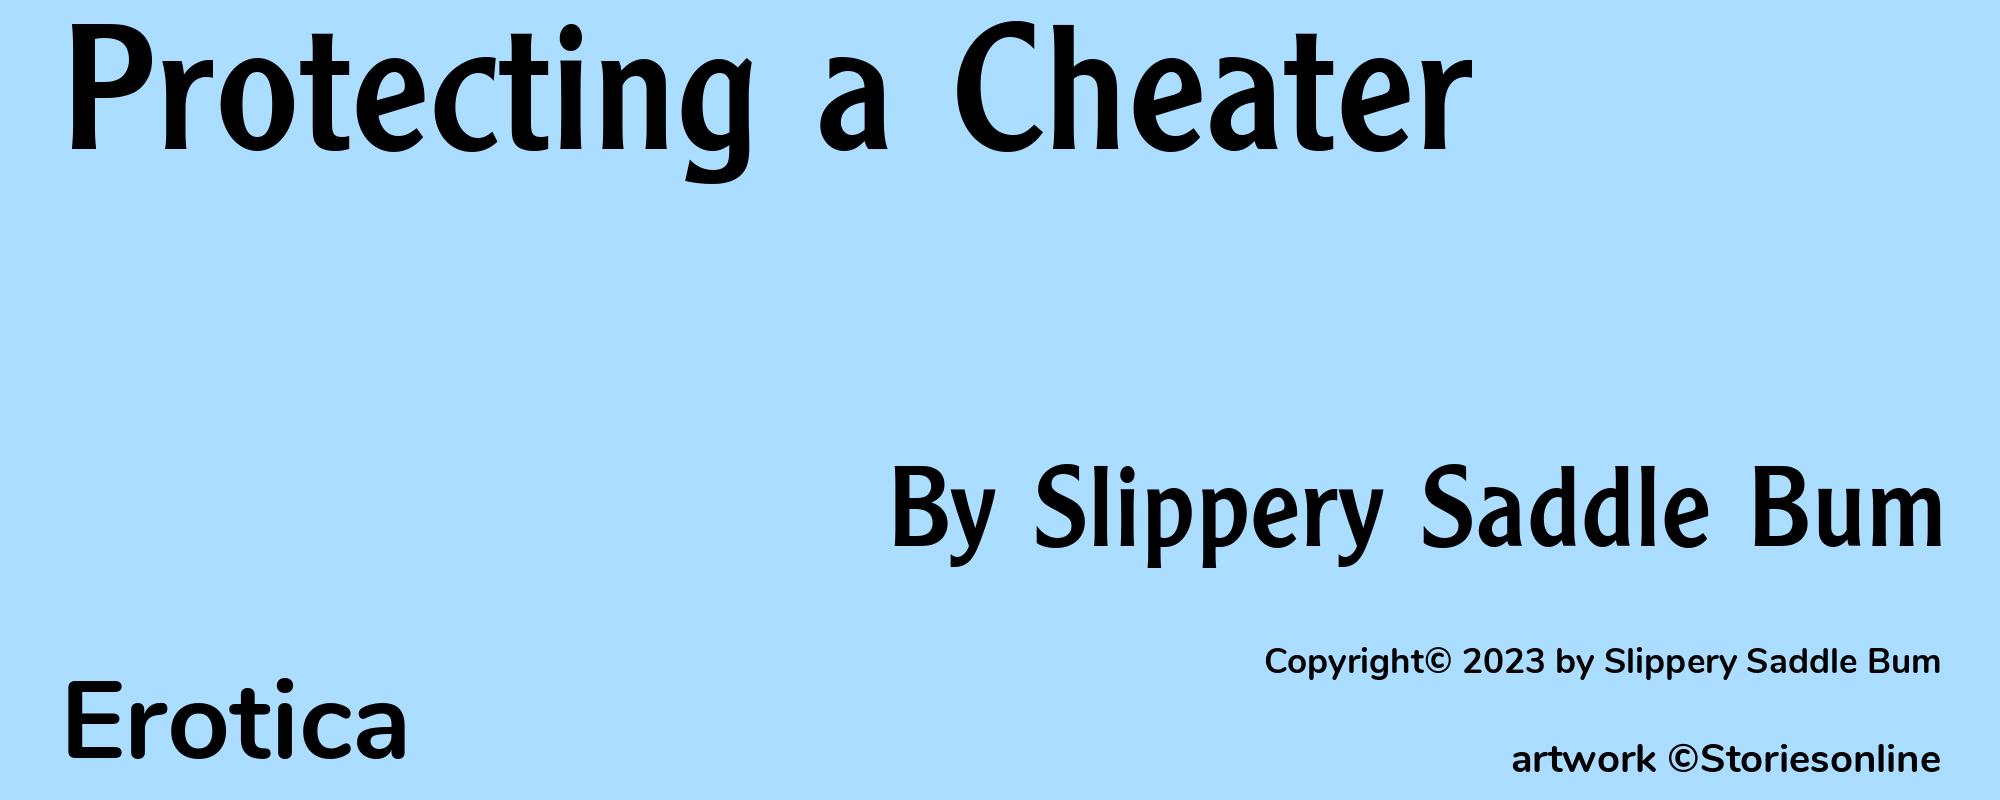 Protecting a Cheater - Cover